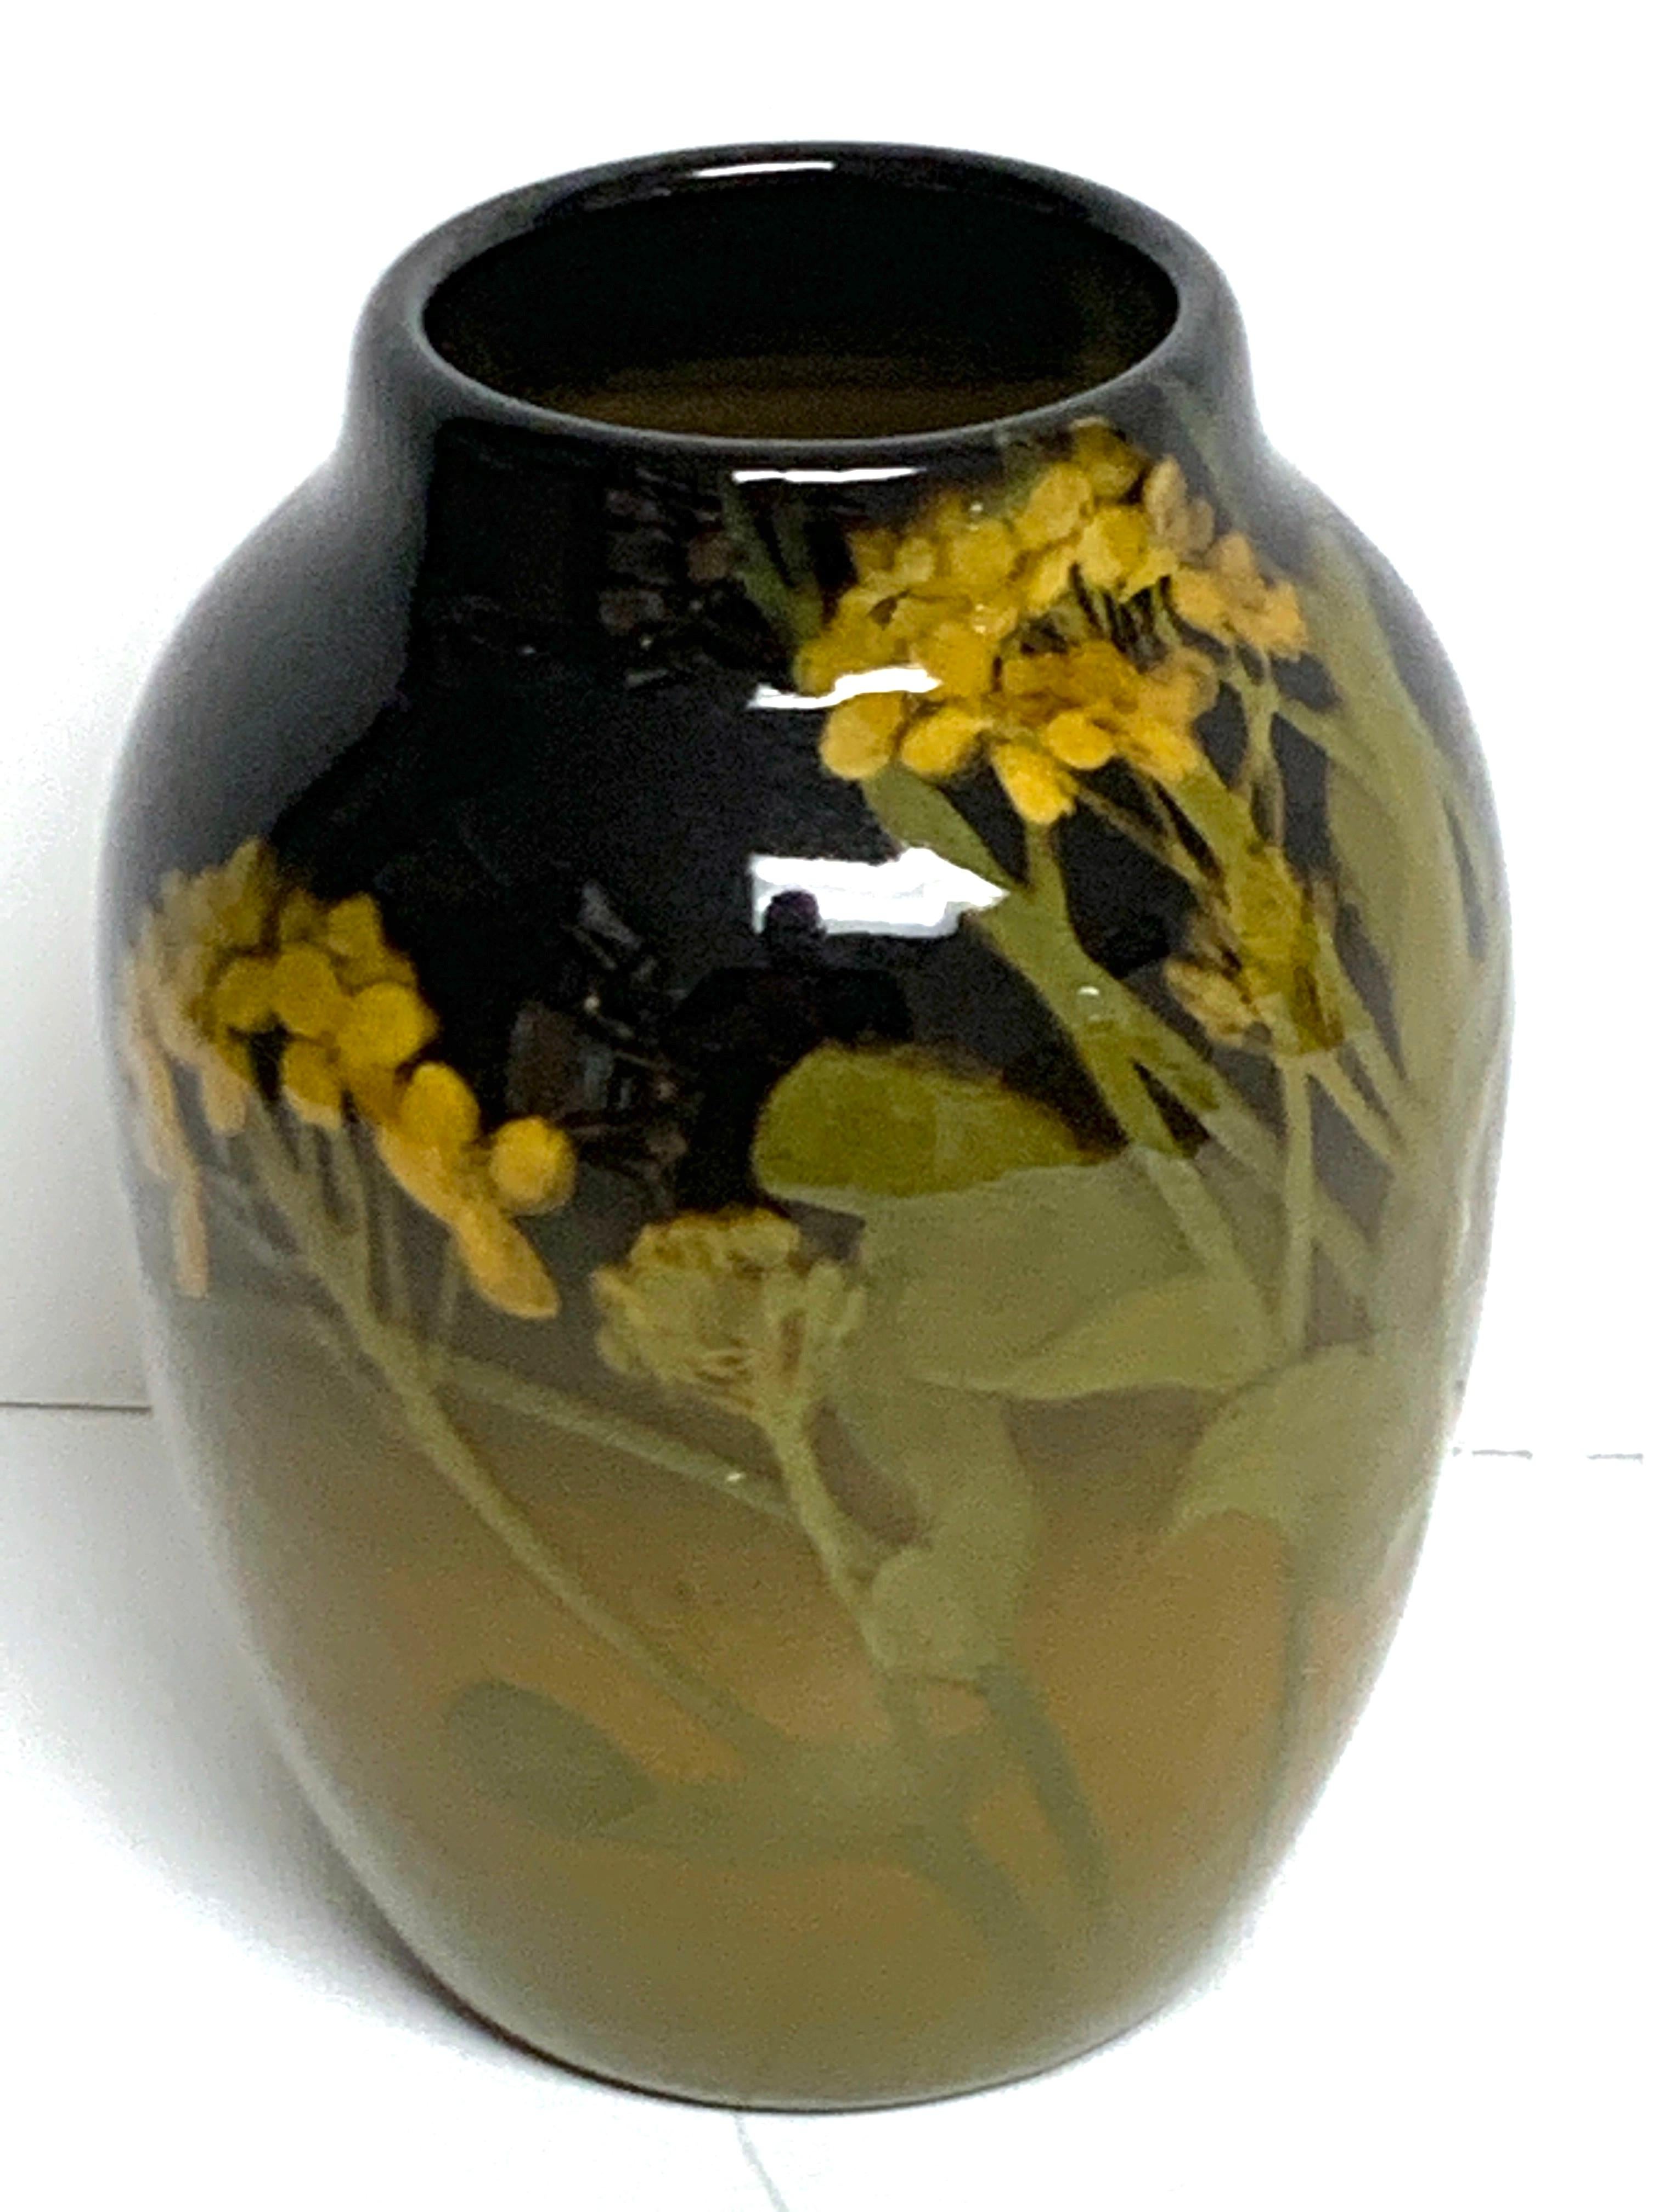 Rookwood iris glaze floral motif vase, by Grace Young, 1901
Subtle beauty, date marked with incised artist cypher of Grace Young.